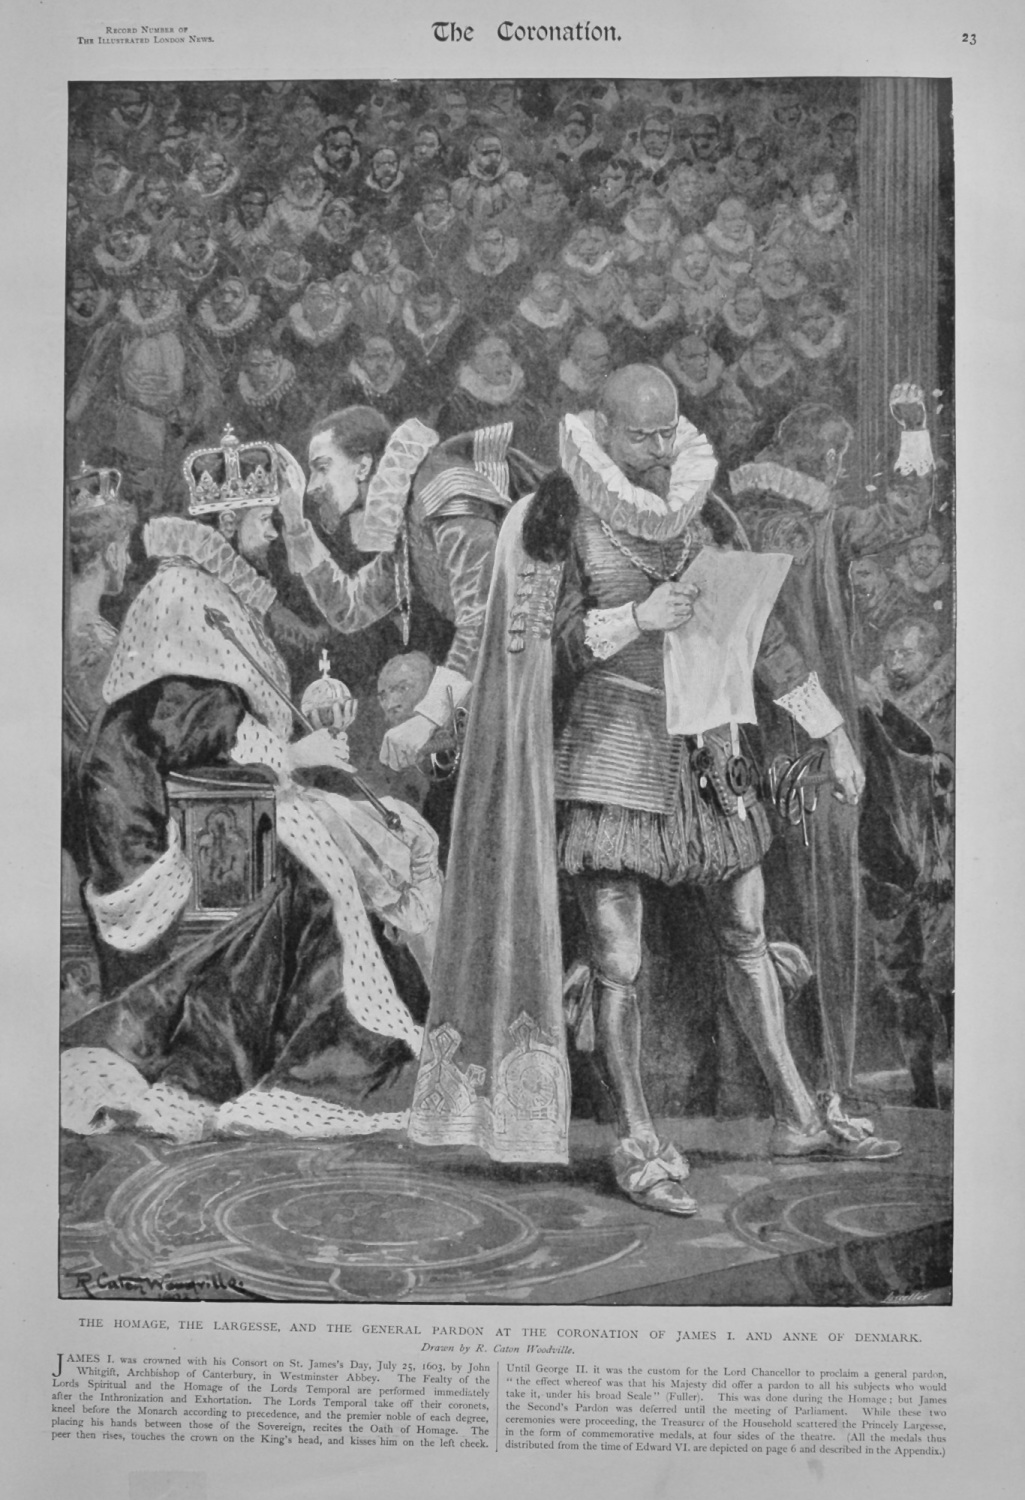 The Homage, the Largesse, and the General Pardon at the Coronation of James